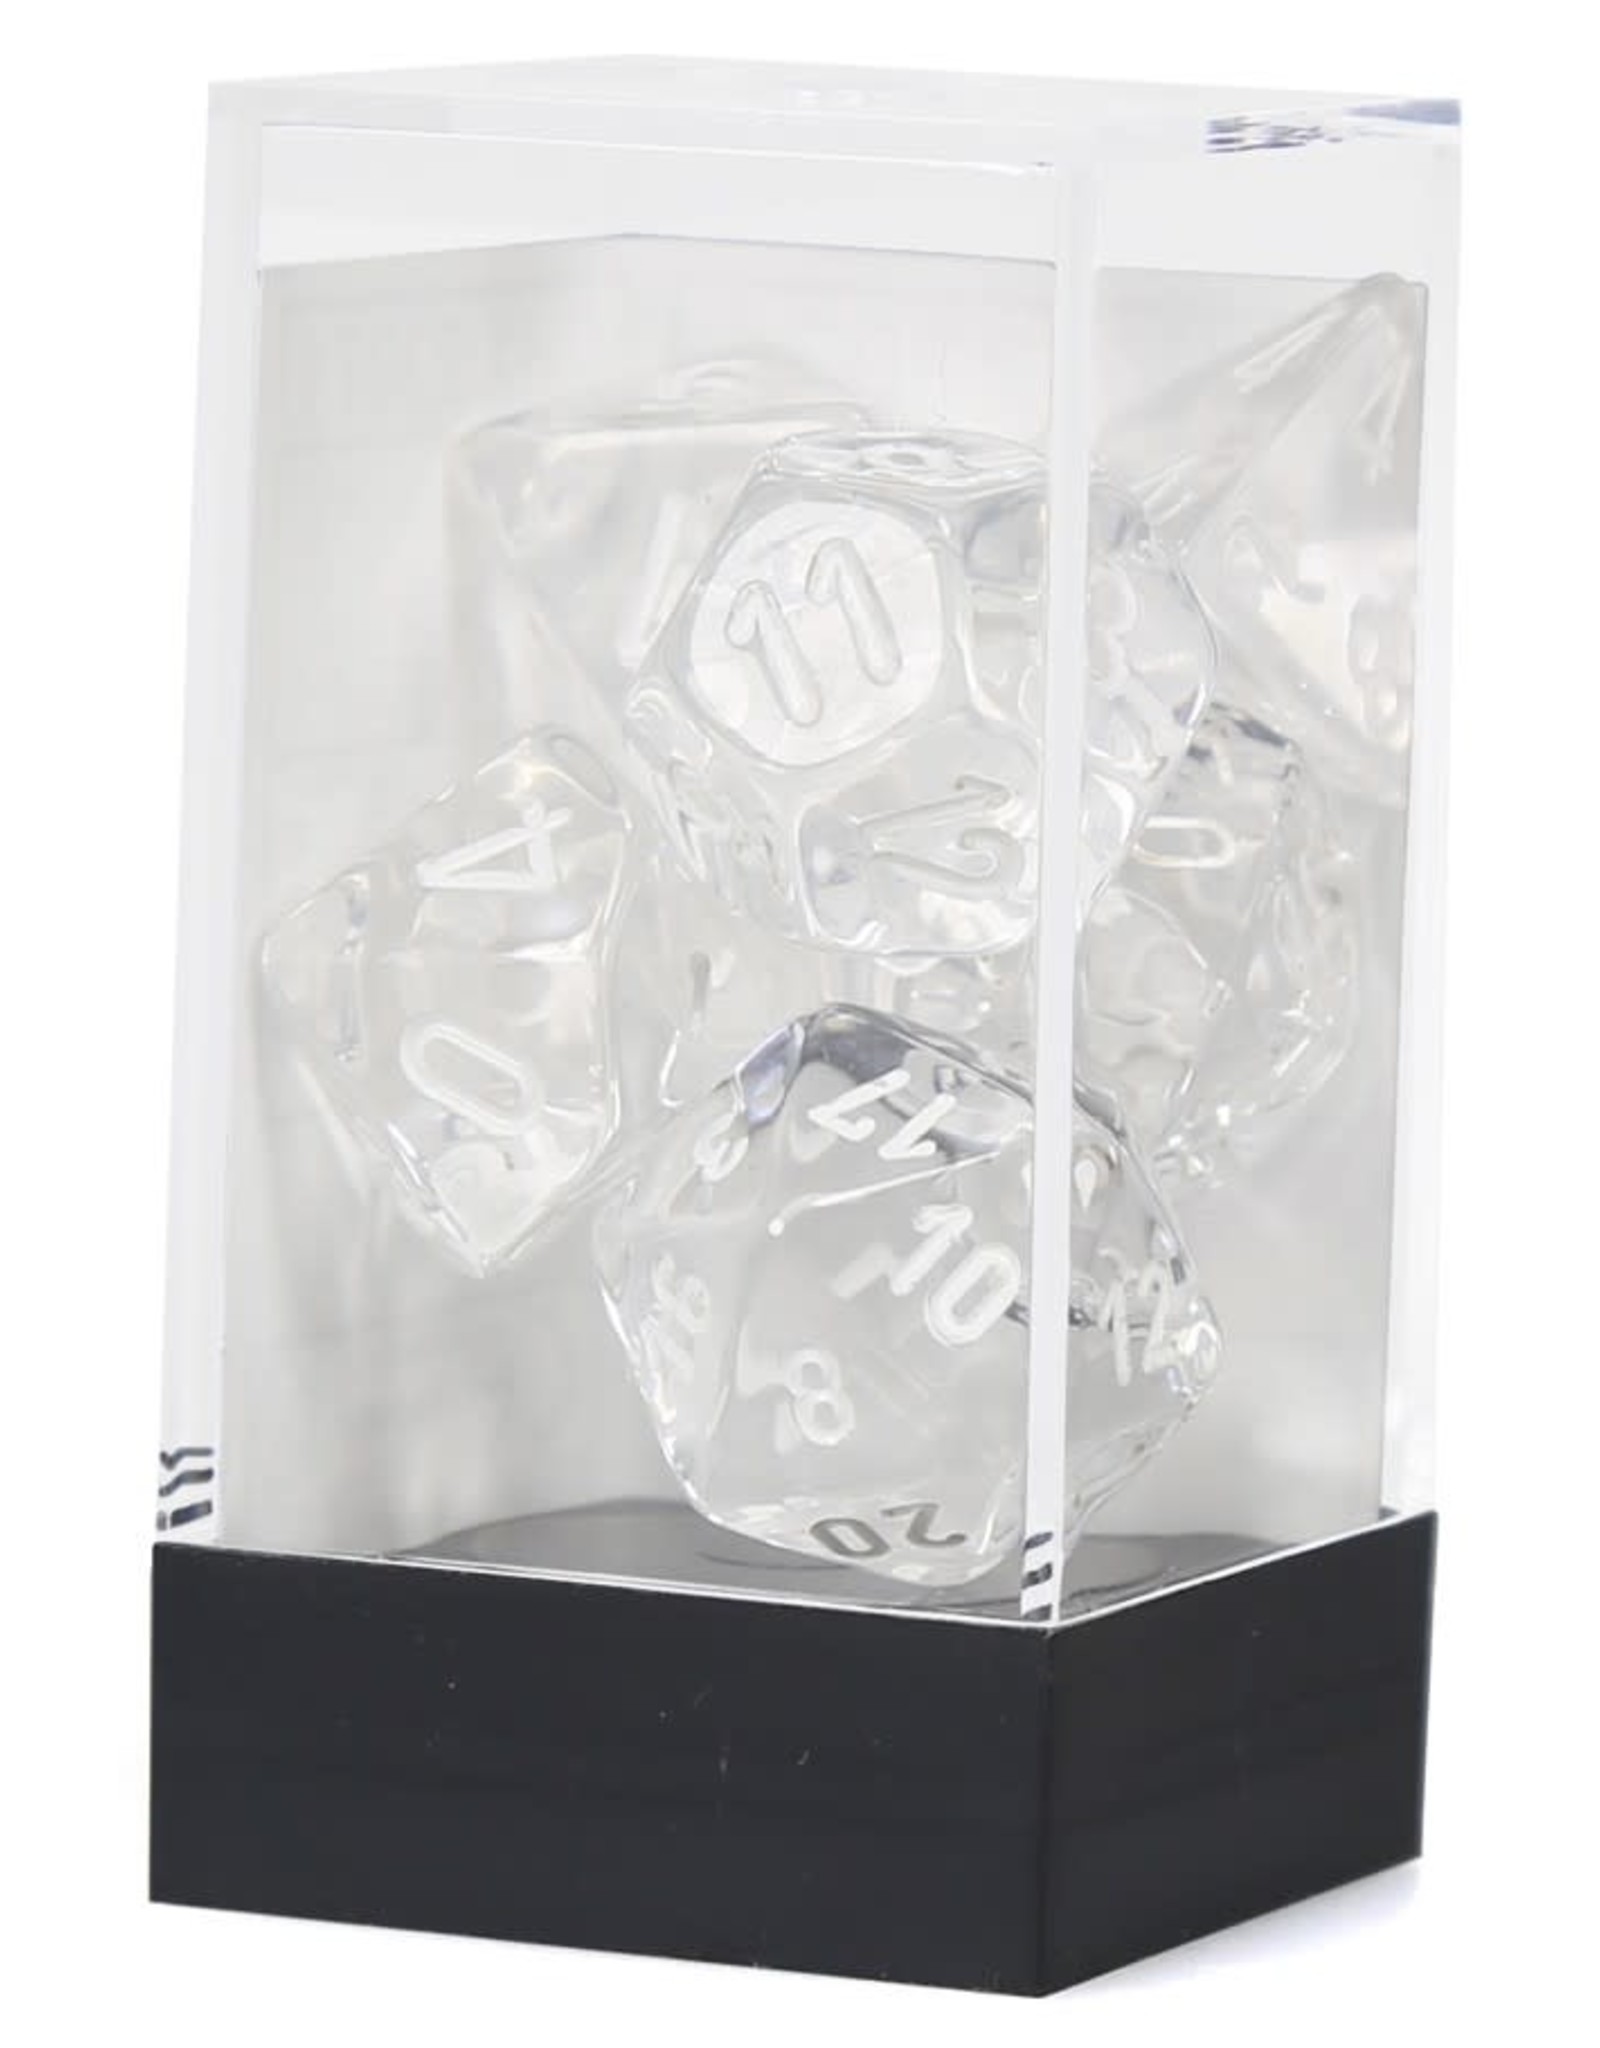 Chessex Polyhedral Dice Set: Translucent Clear (7)